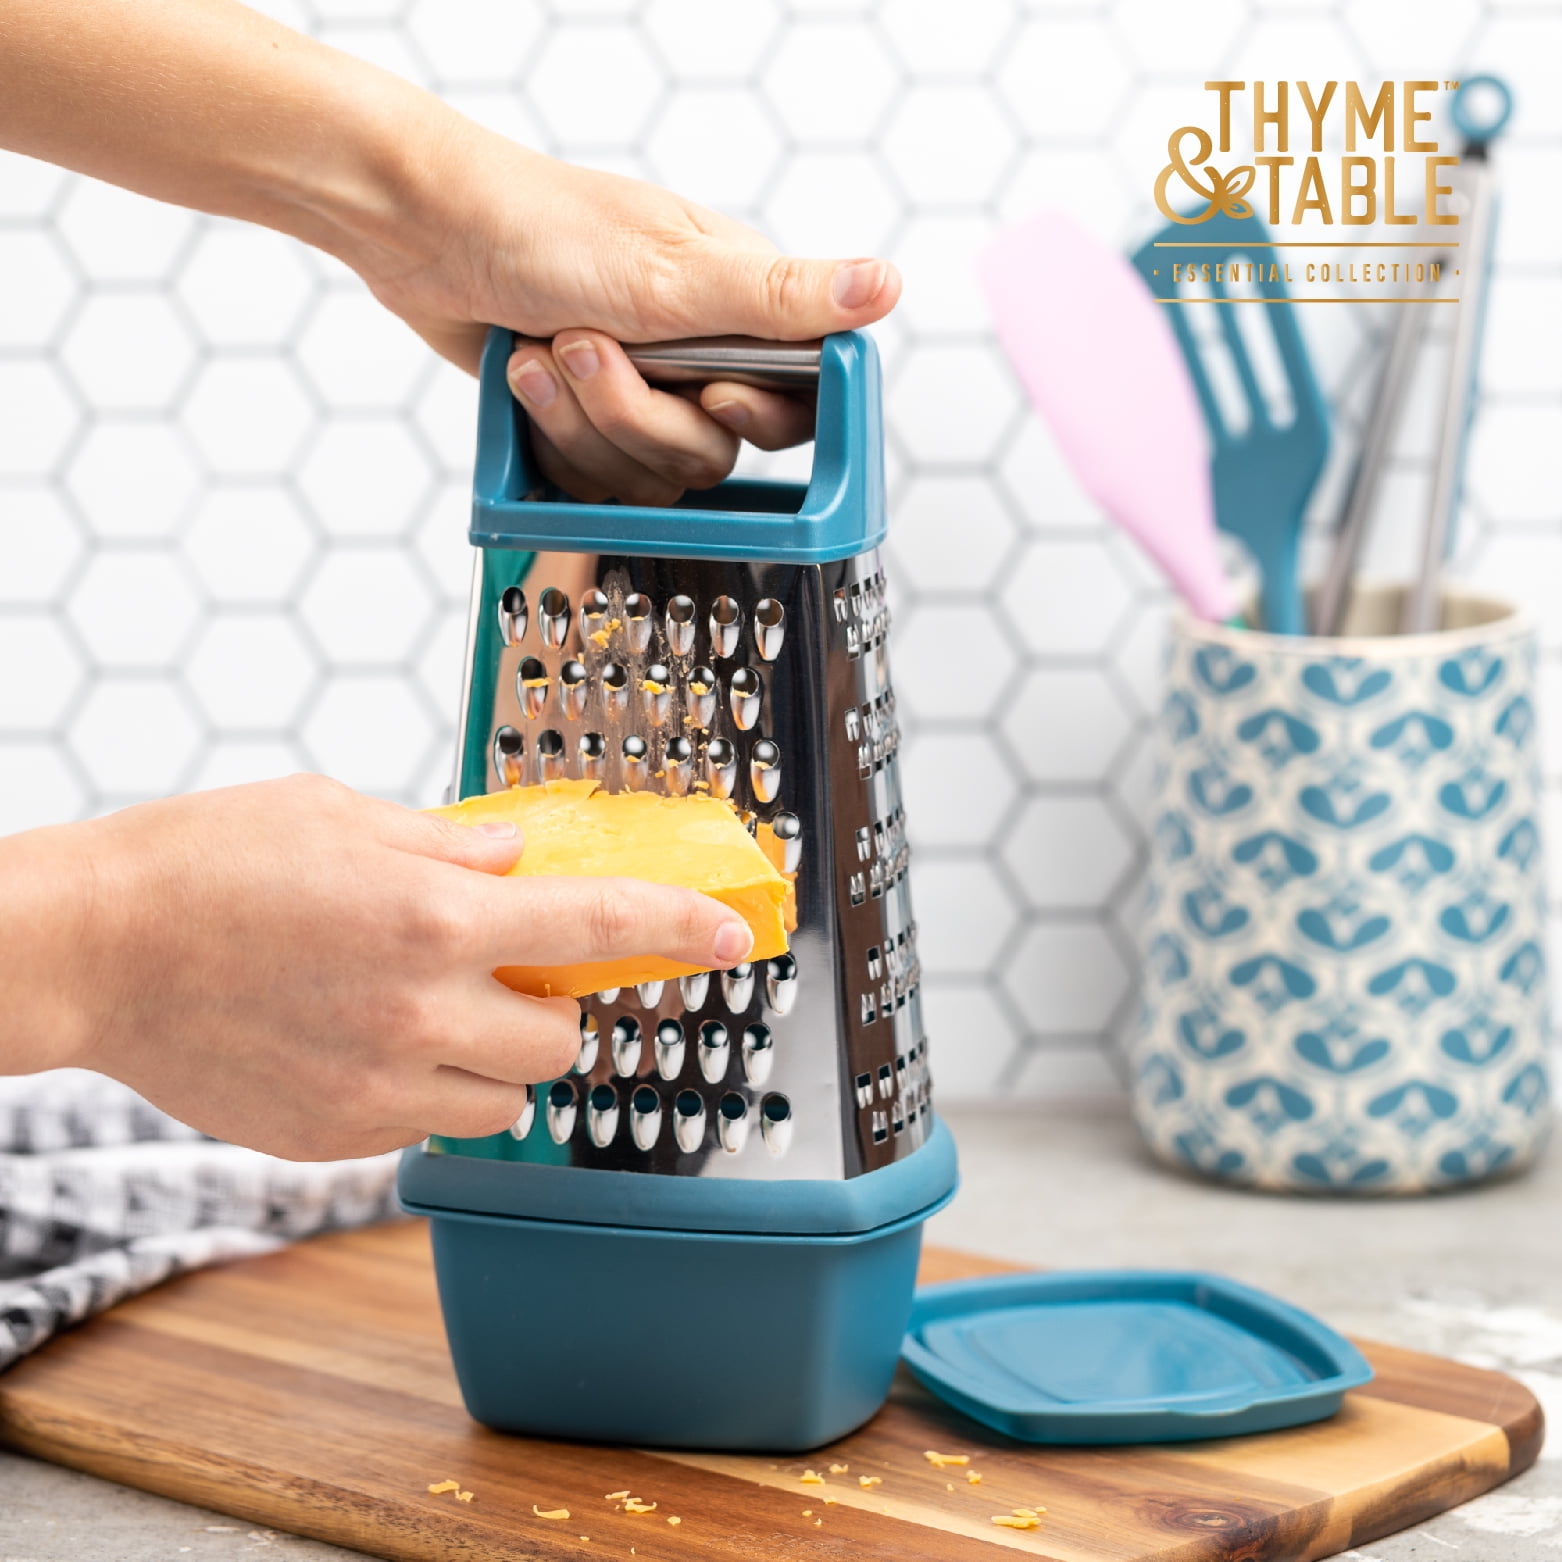 Kitchen & Table by H-E-B Box Grater with Storage